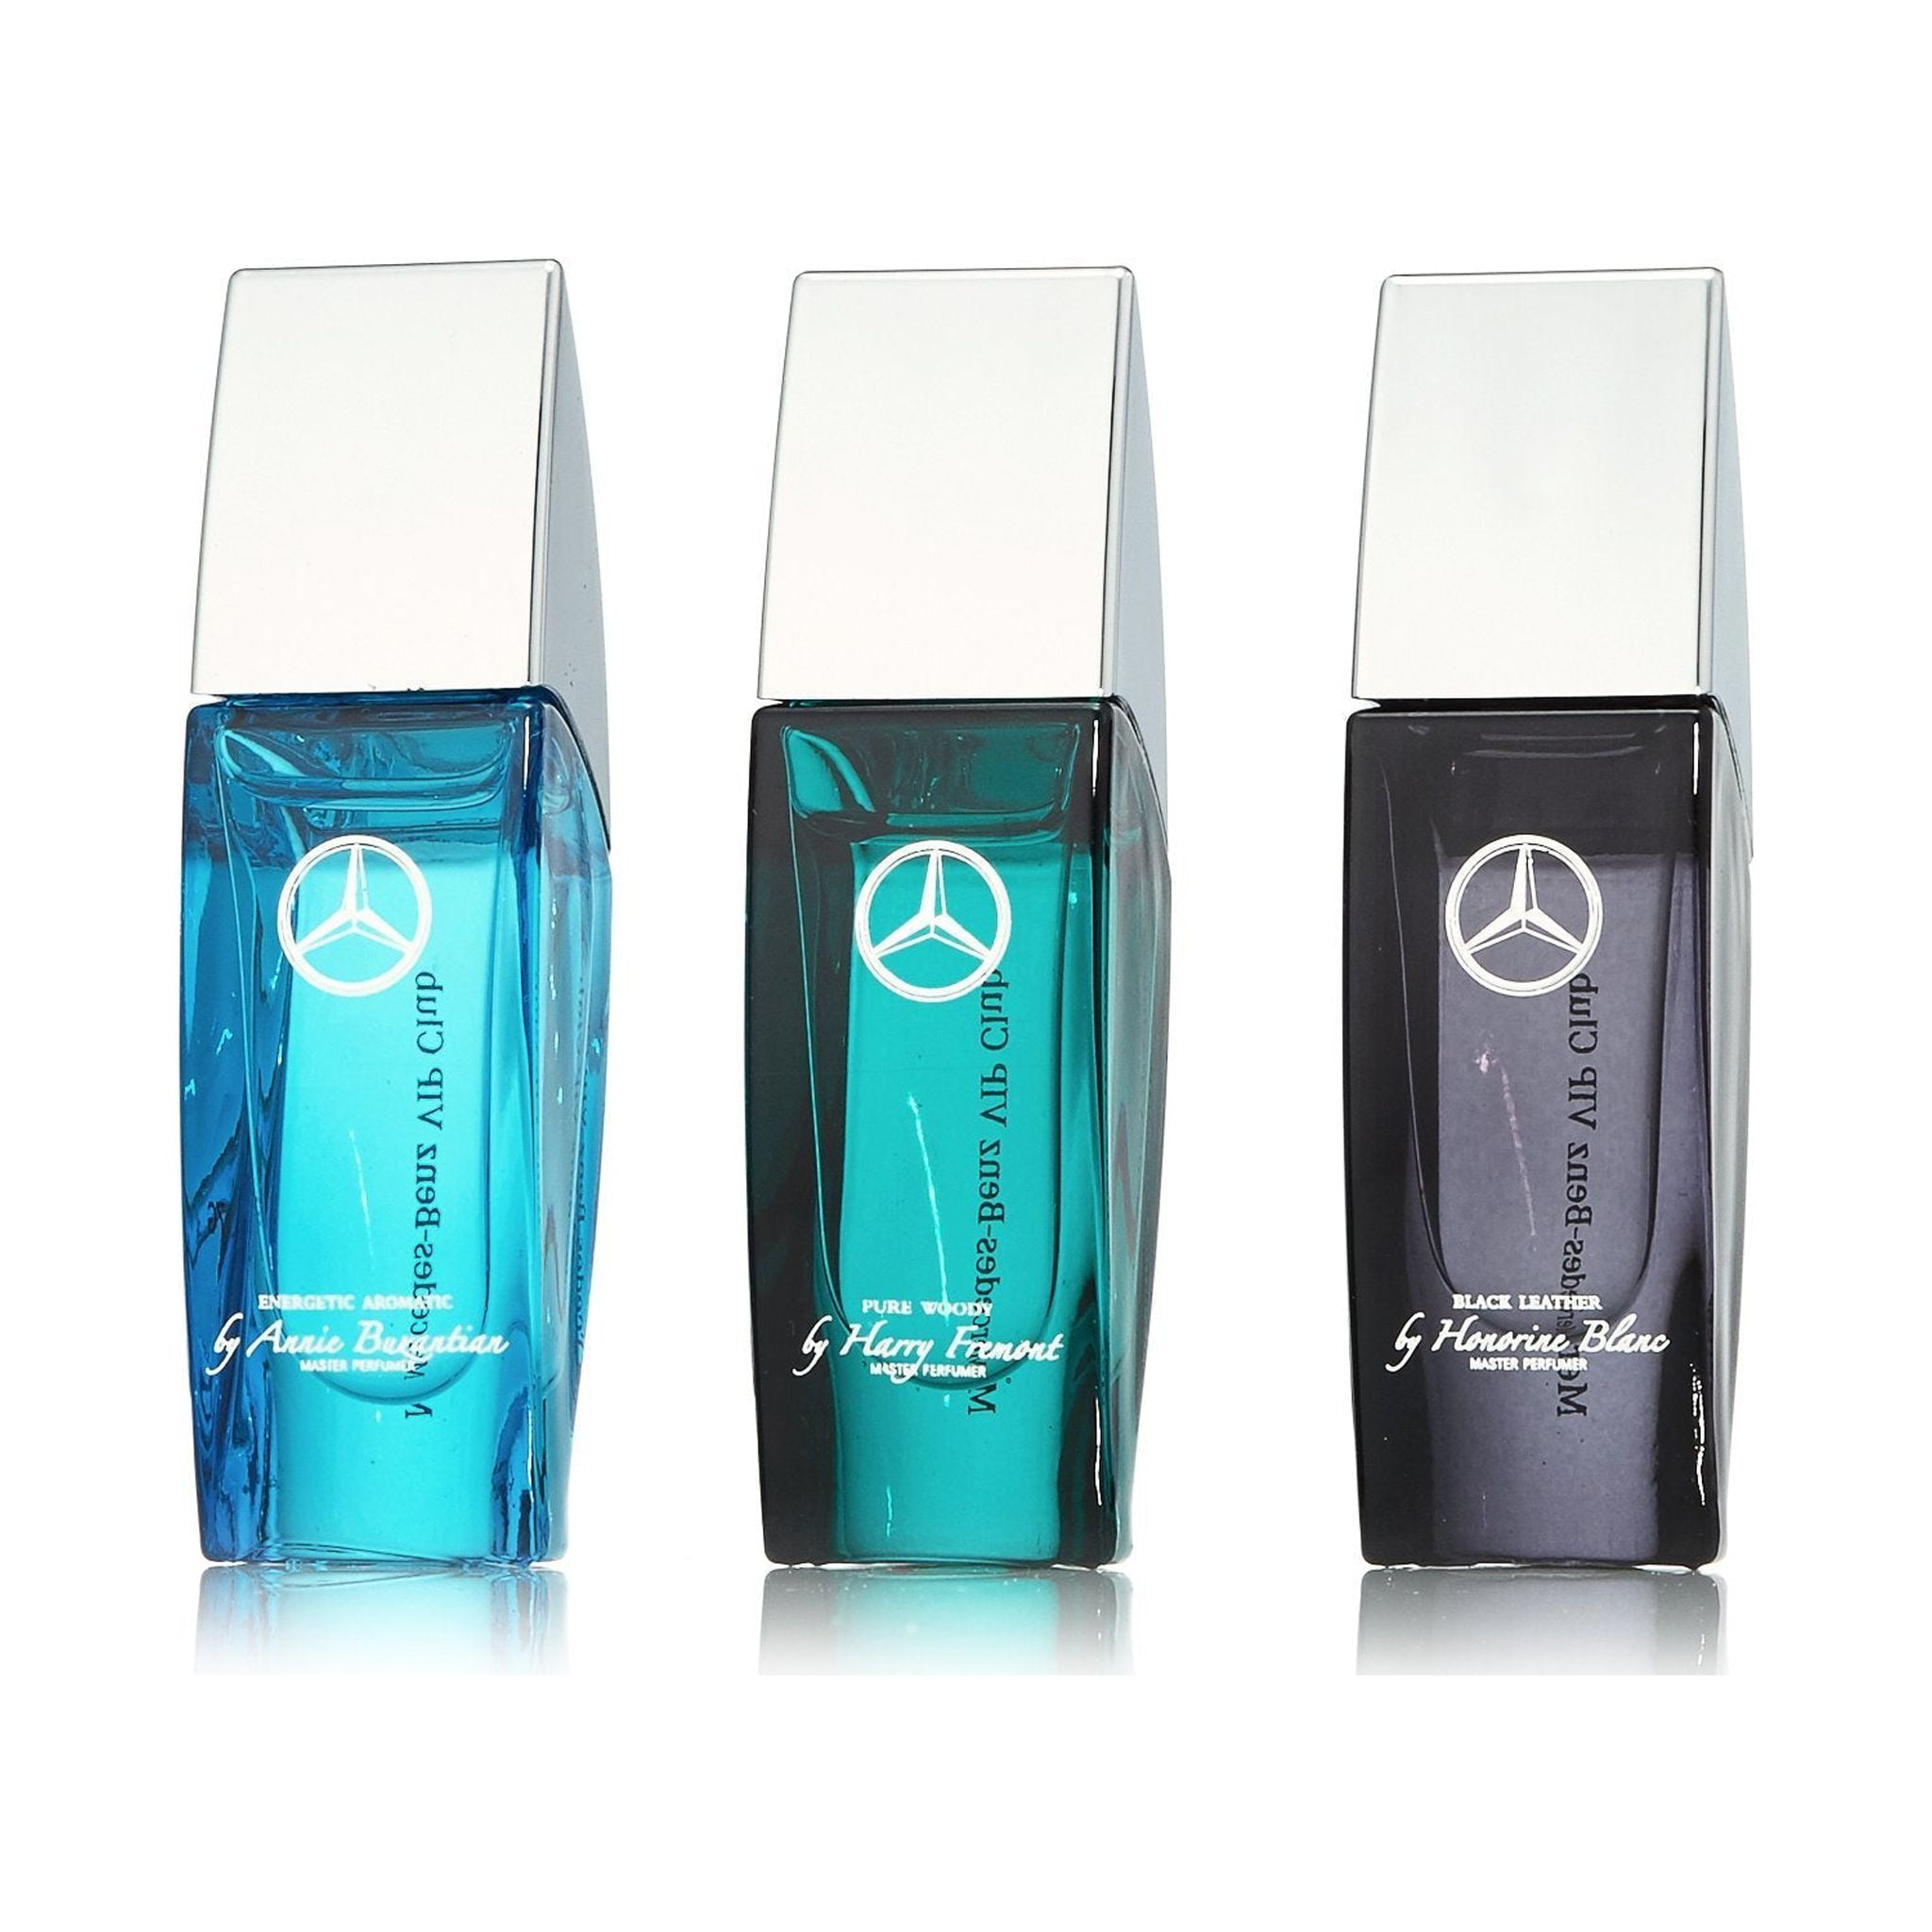 VIP Club 3 Piece Miniature Gift Set for Men by Mercedes-Benz 